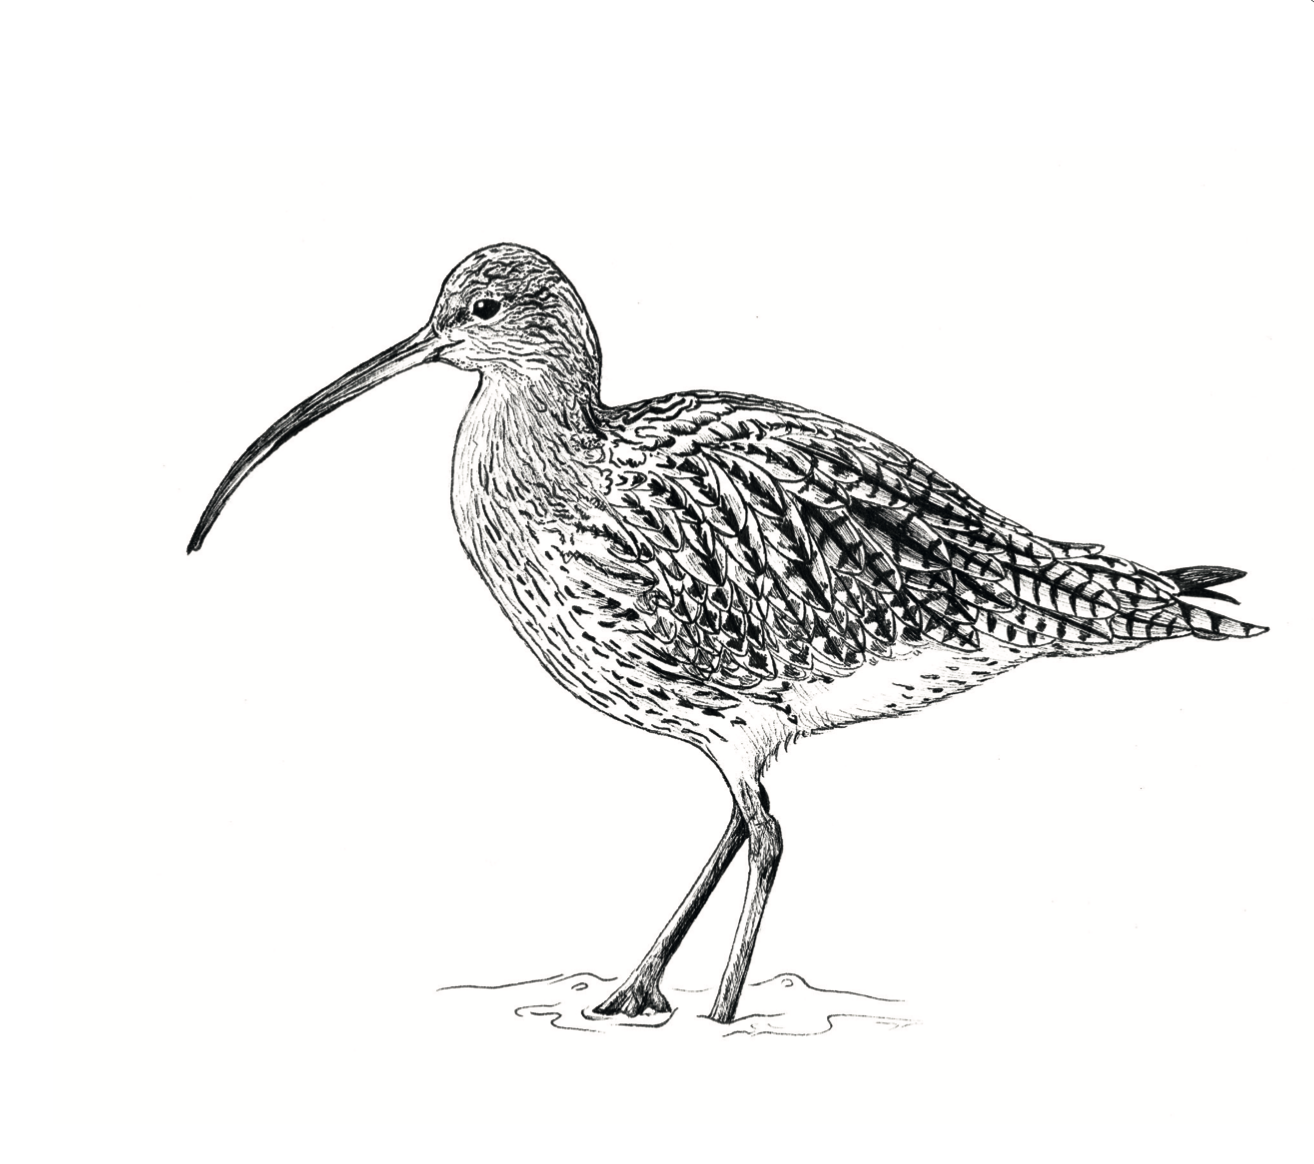   Curlew  